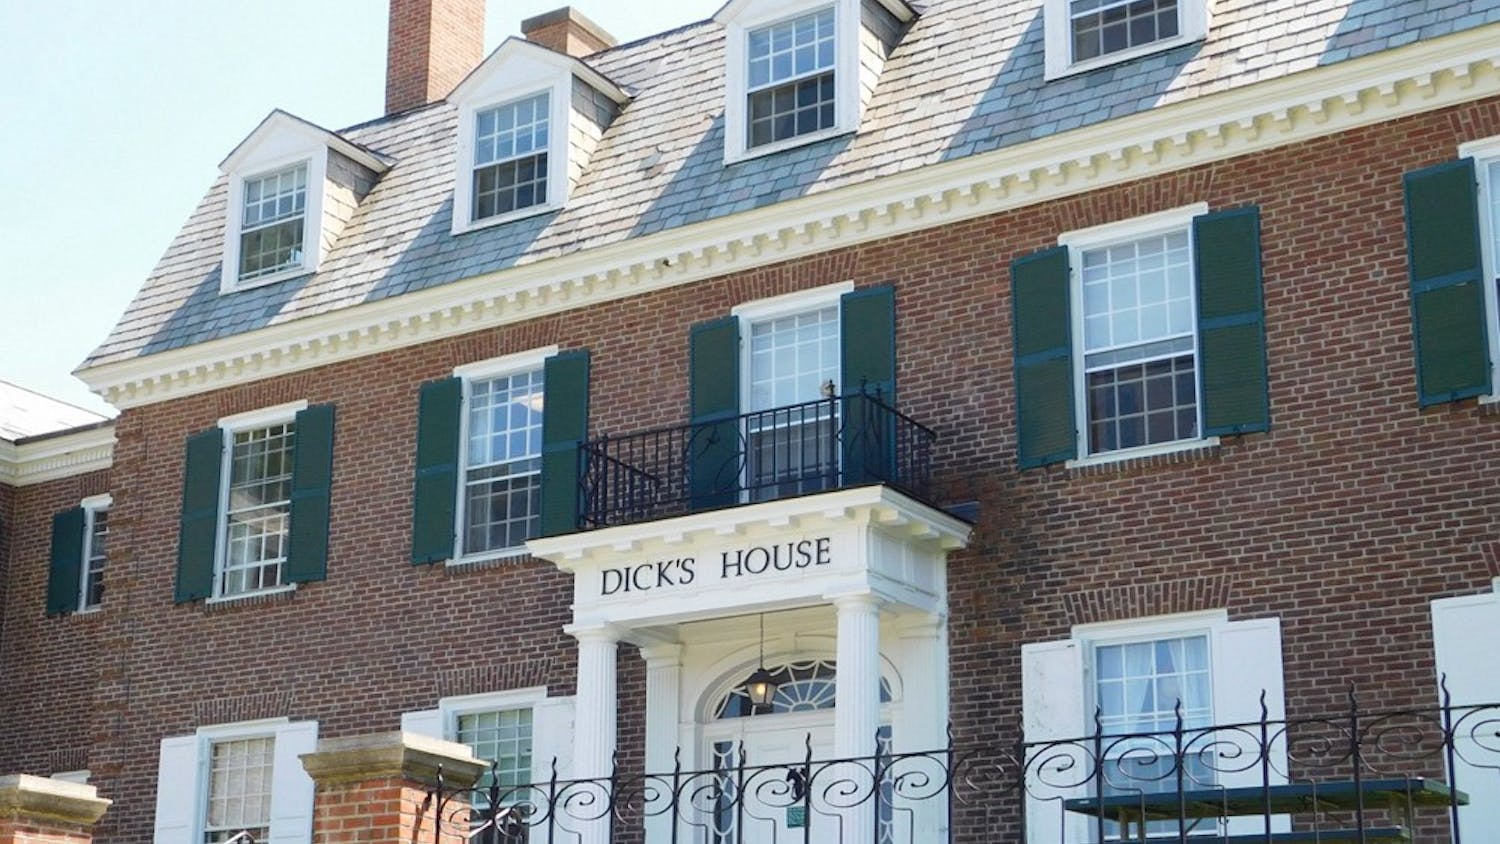 Many students who are Good Sammed are treated at Dick's House.